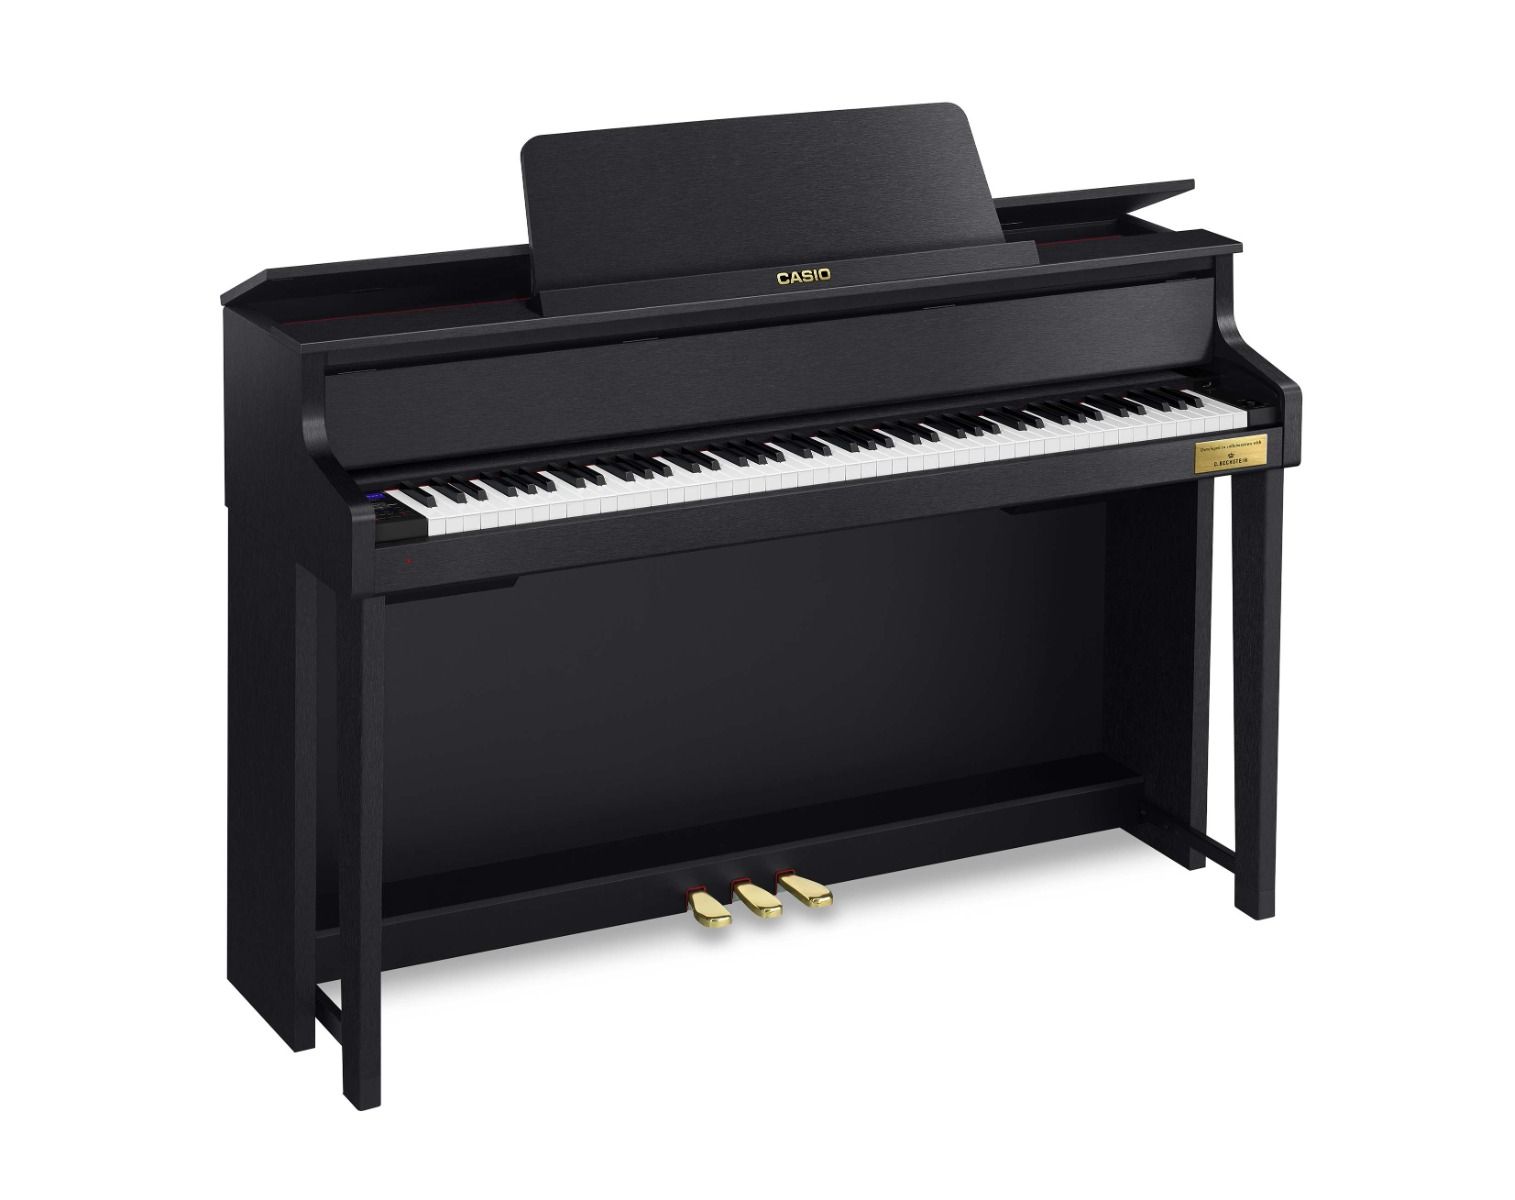 Casio GP-310 Grand Hybrid Piano With Adjustable Bench